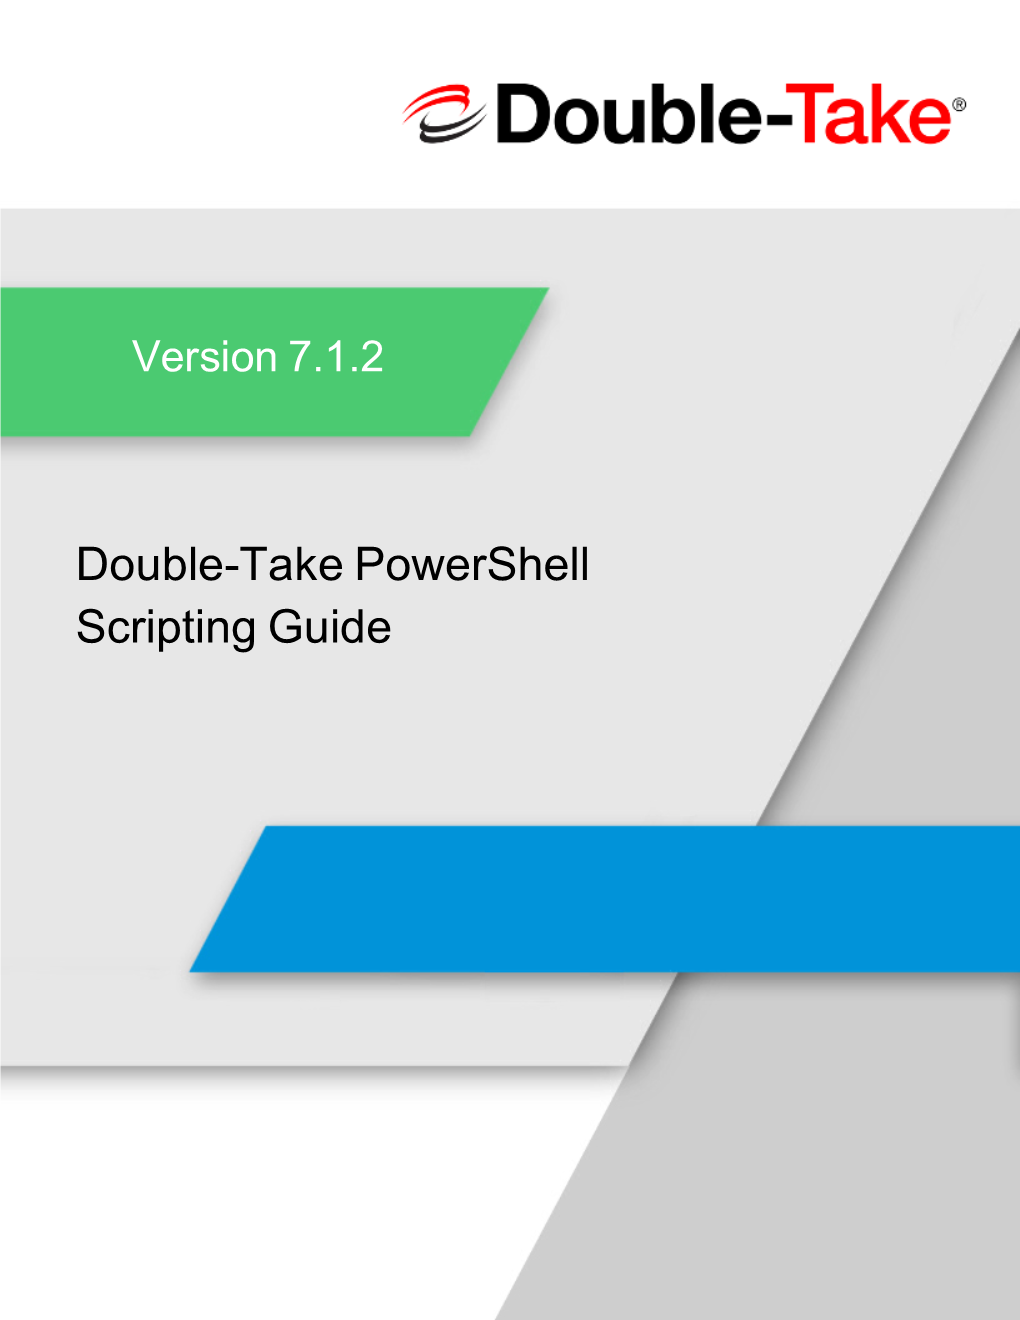 Double-Take Powershell Scripting Guide